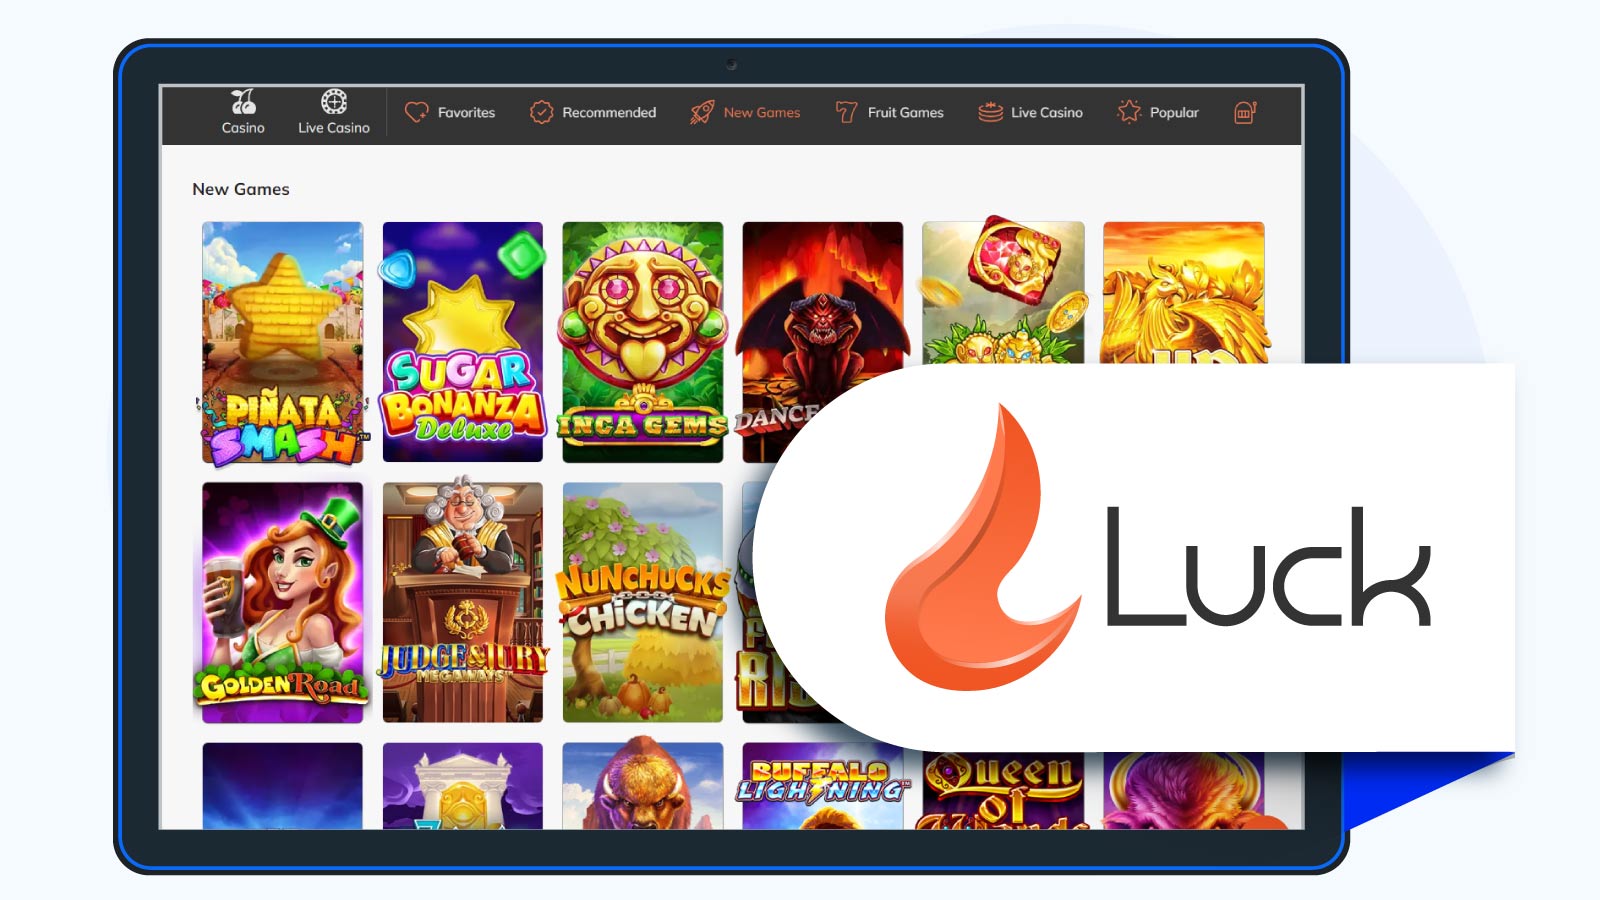 Luck.com – Best new slot site for mobile devices